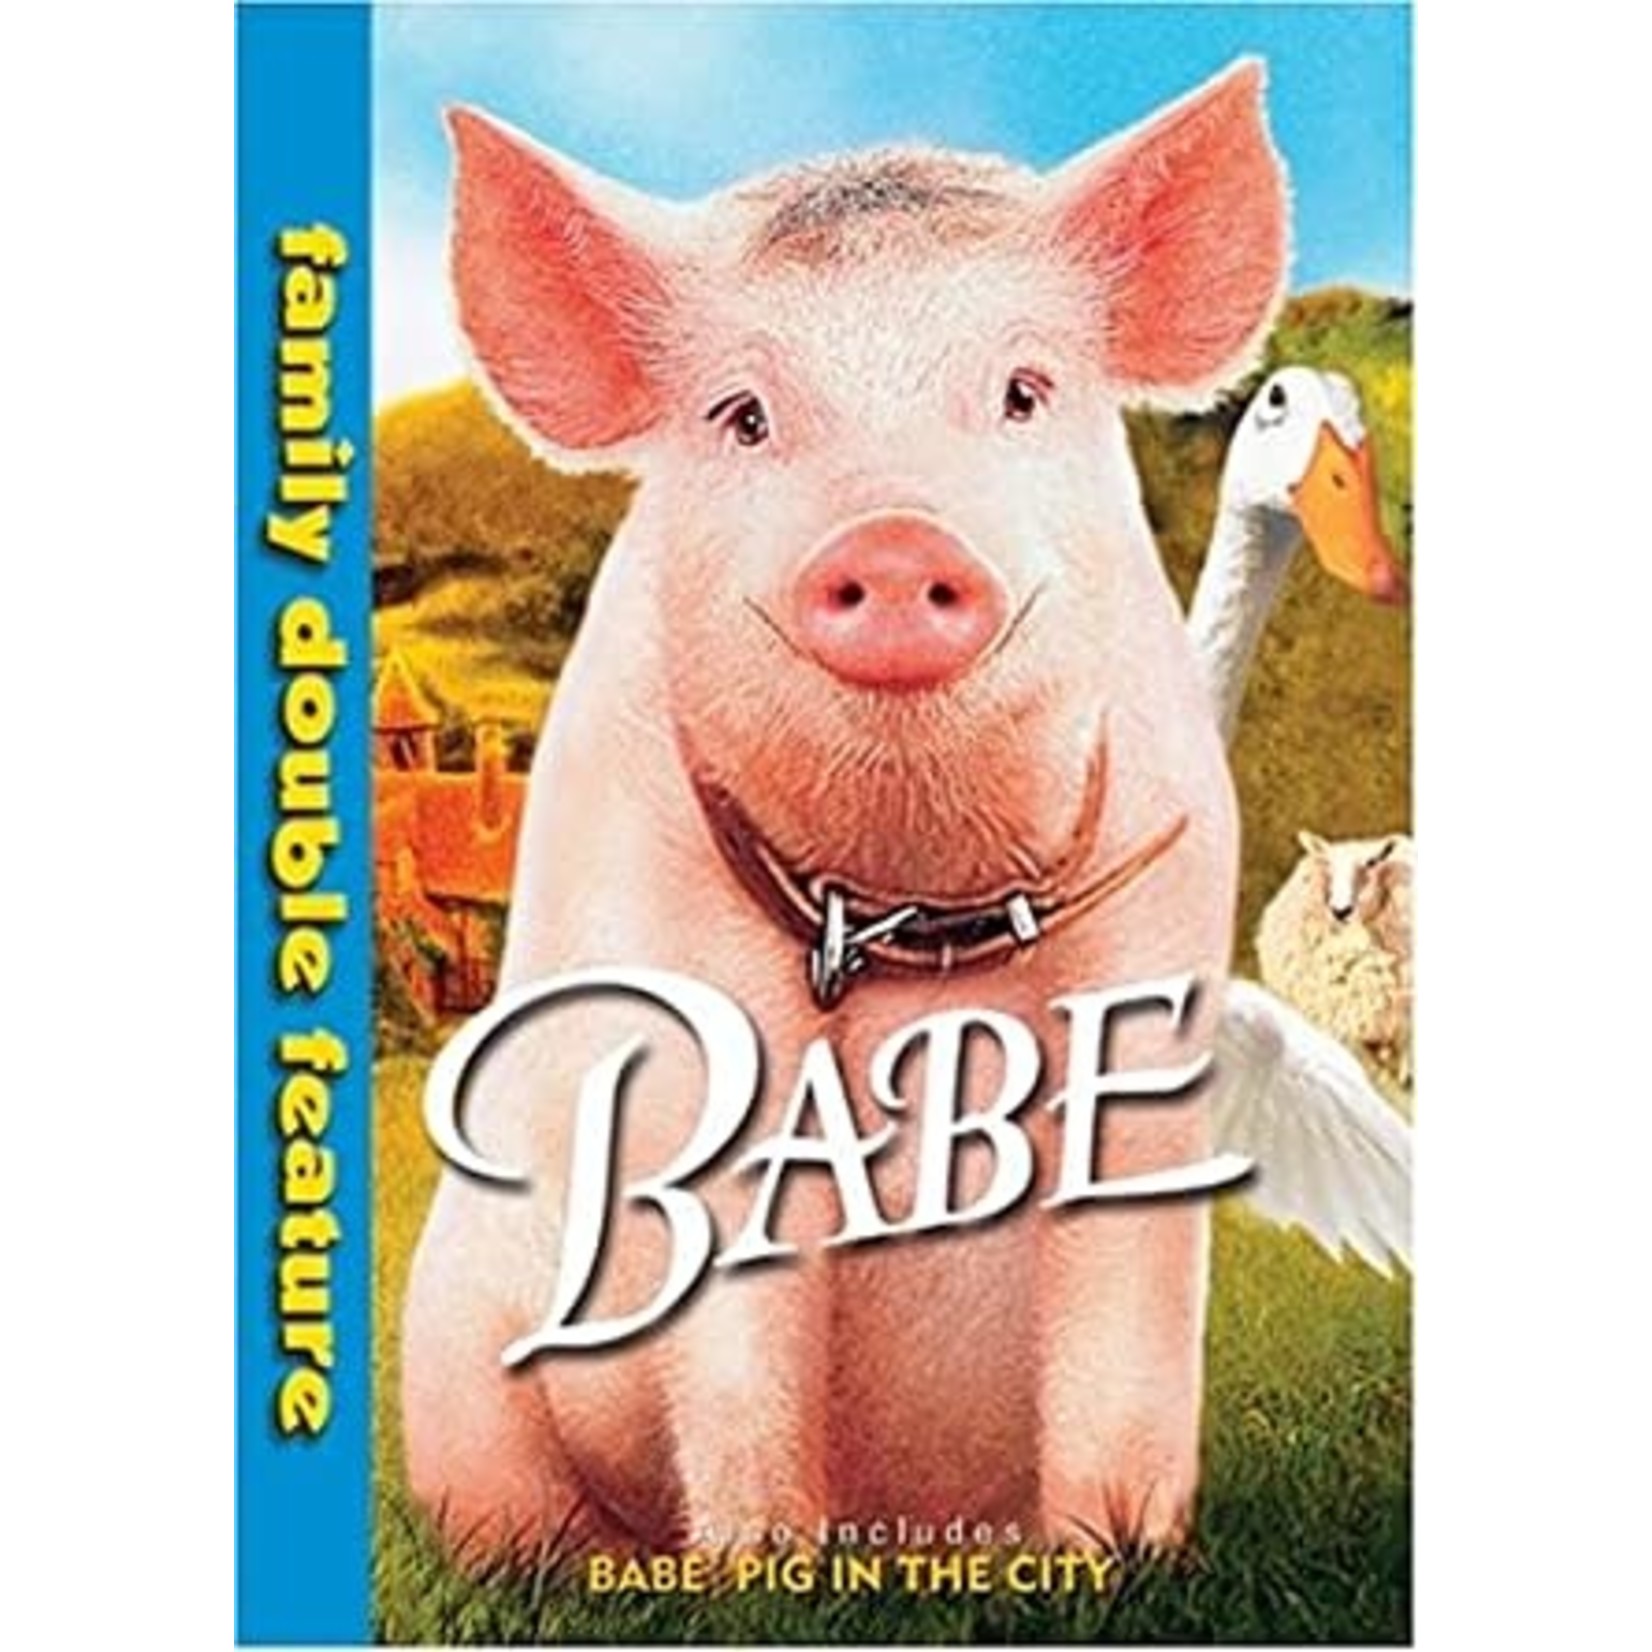 Babe/Babe 2: Pig In The City - Family Double Feature [USED CD]